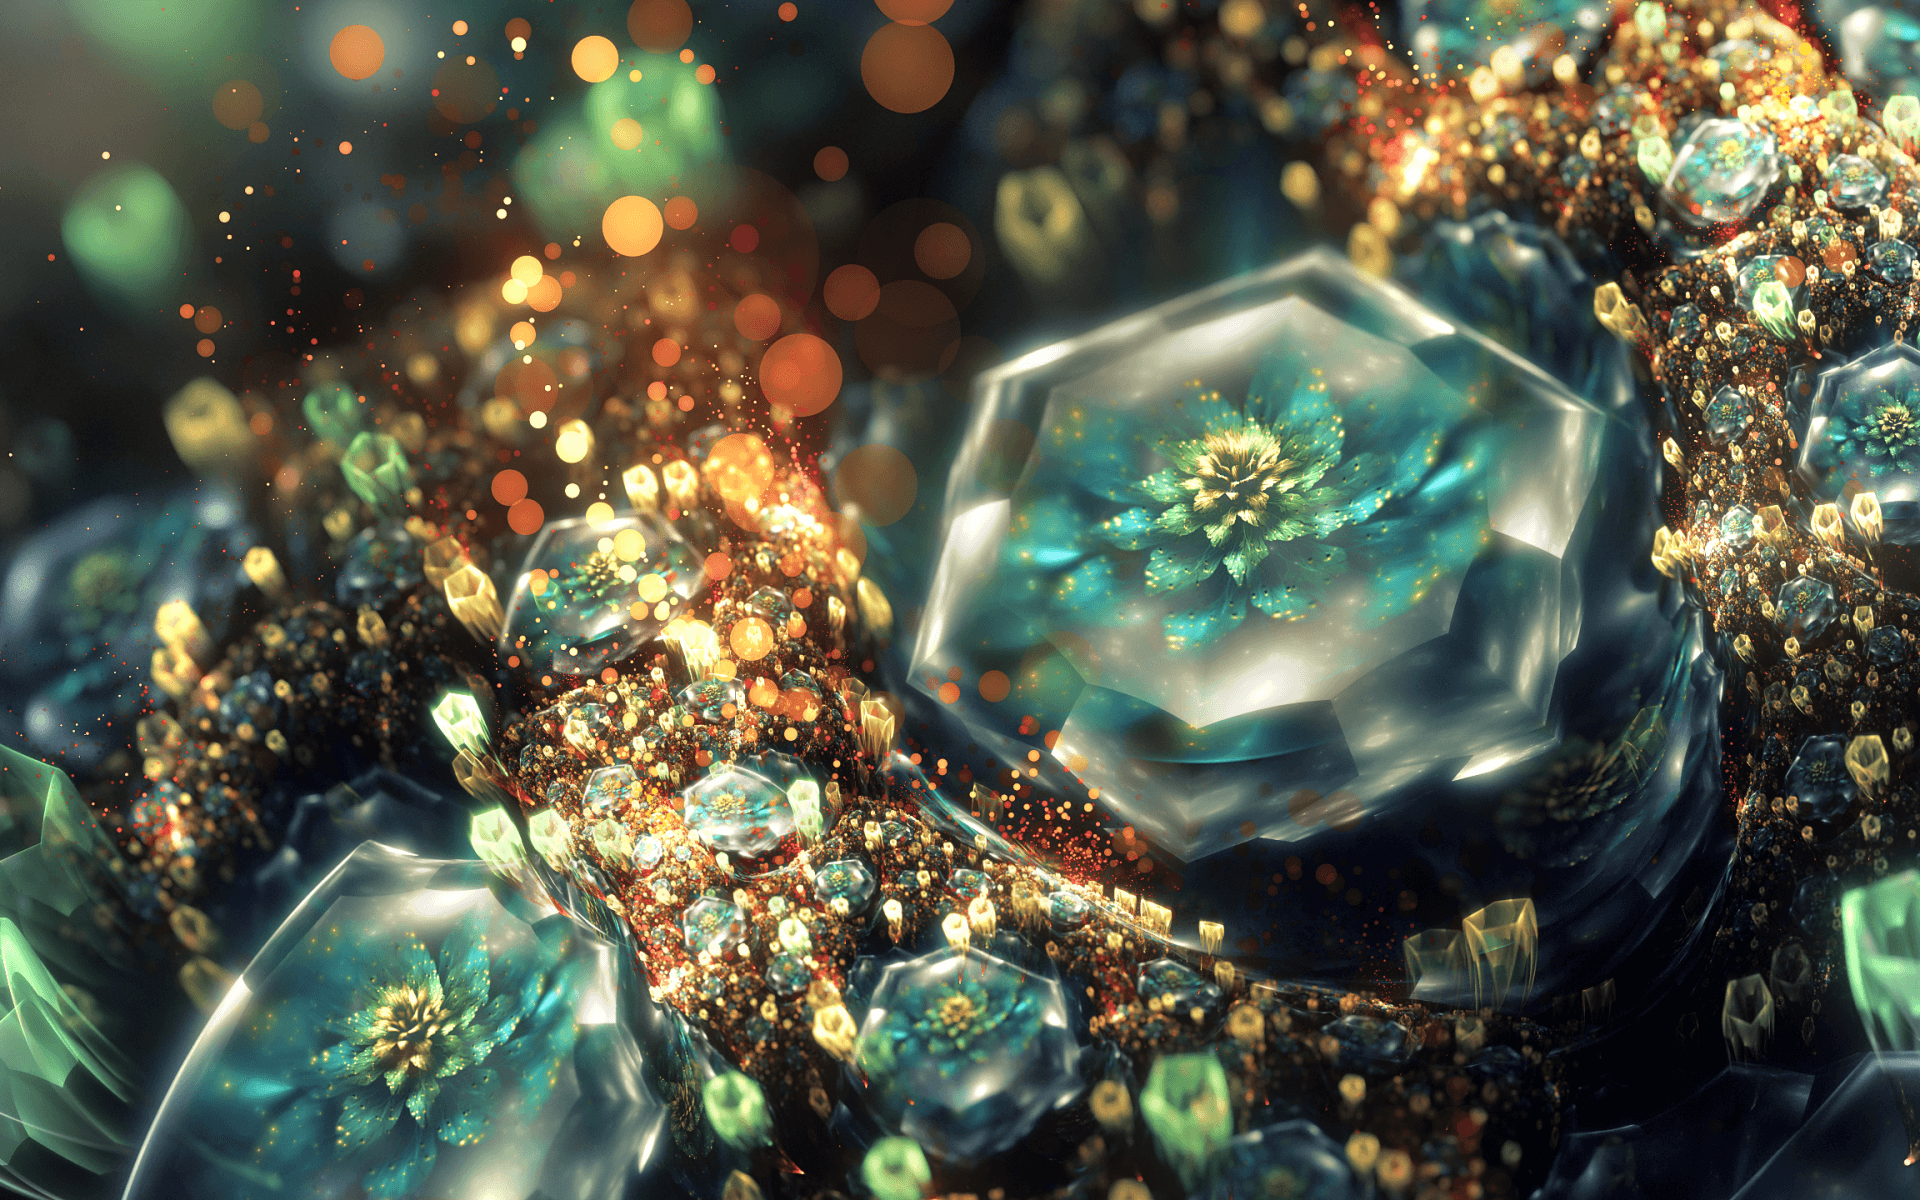 Download 1920x1200 Crystals Wallpapers for MacBook Pro 17 inch.